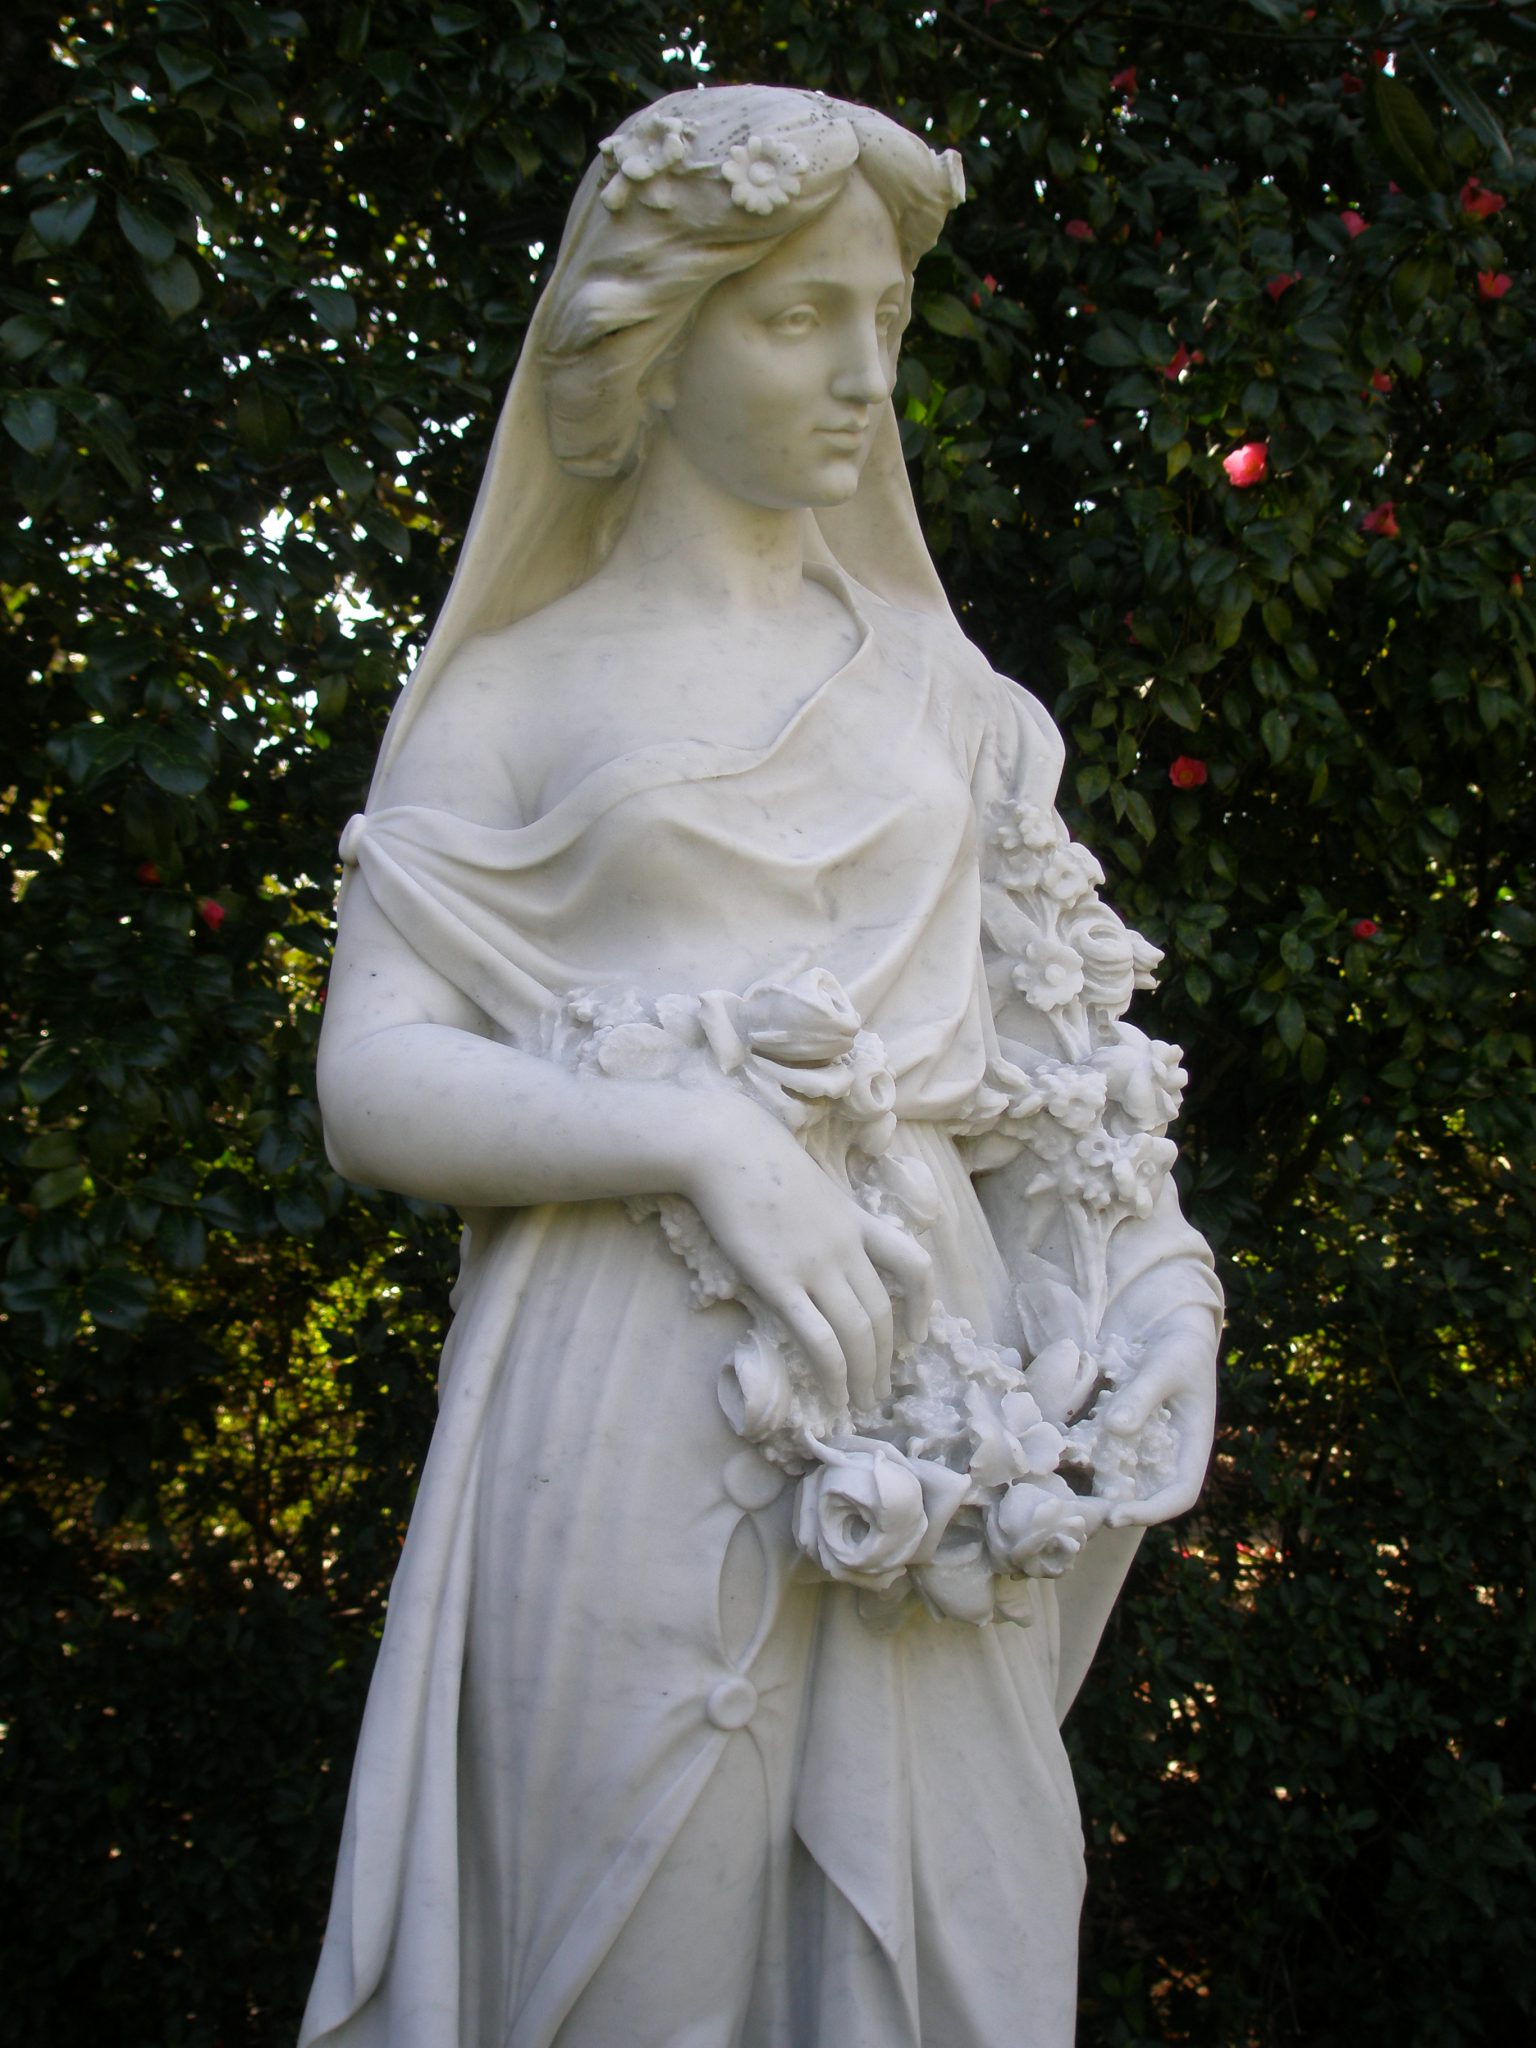 Another of the Goddesses who represent the Four Seasons, in the Secret Garden.